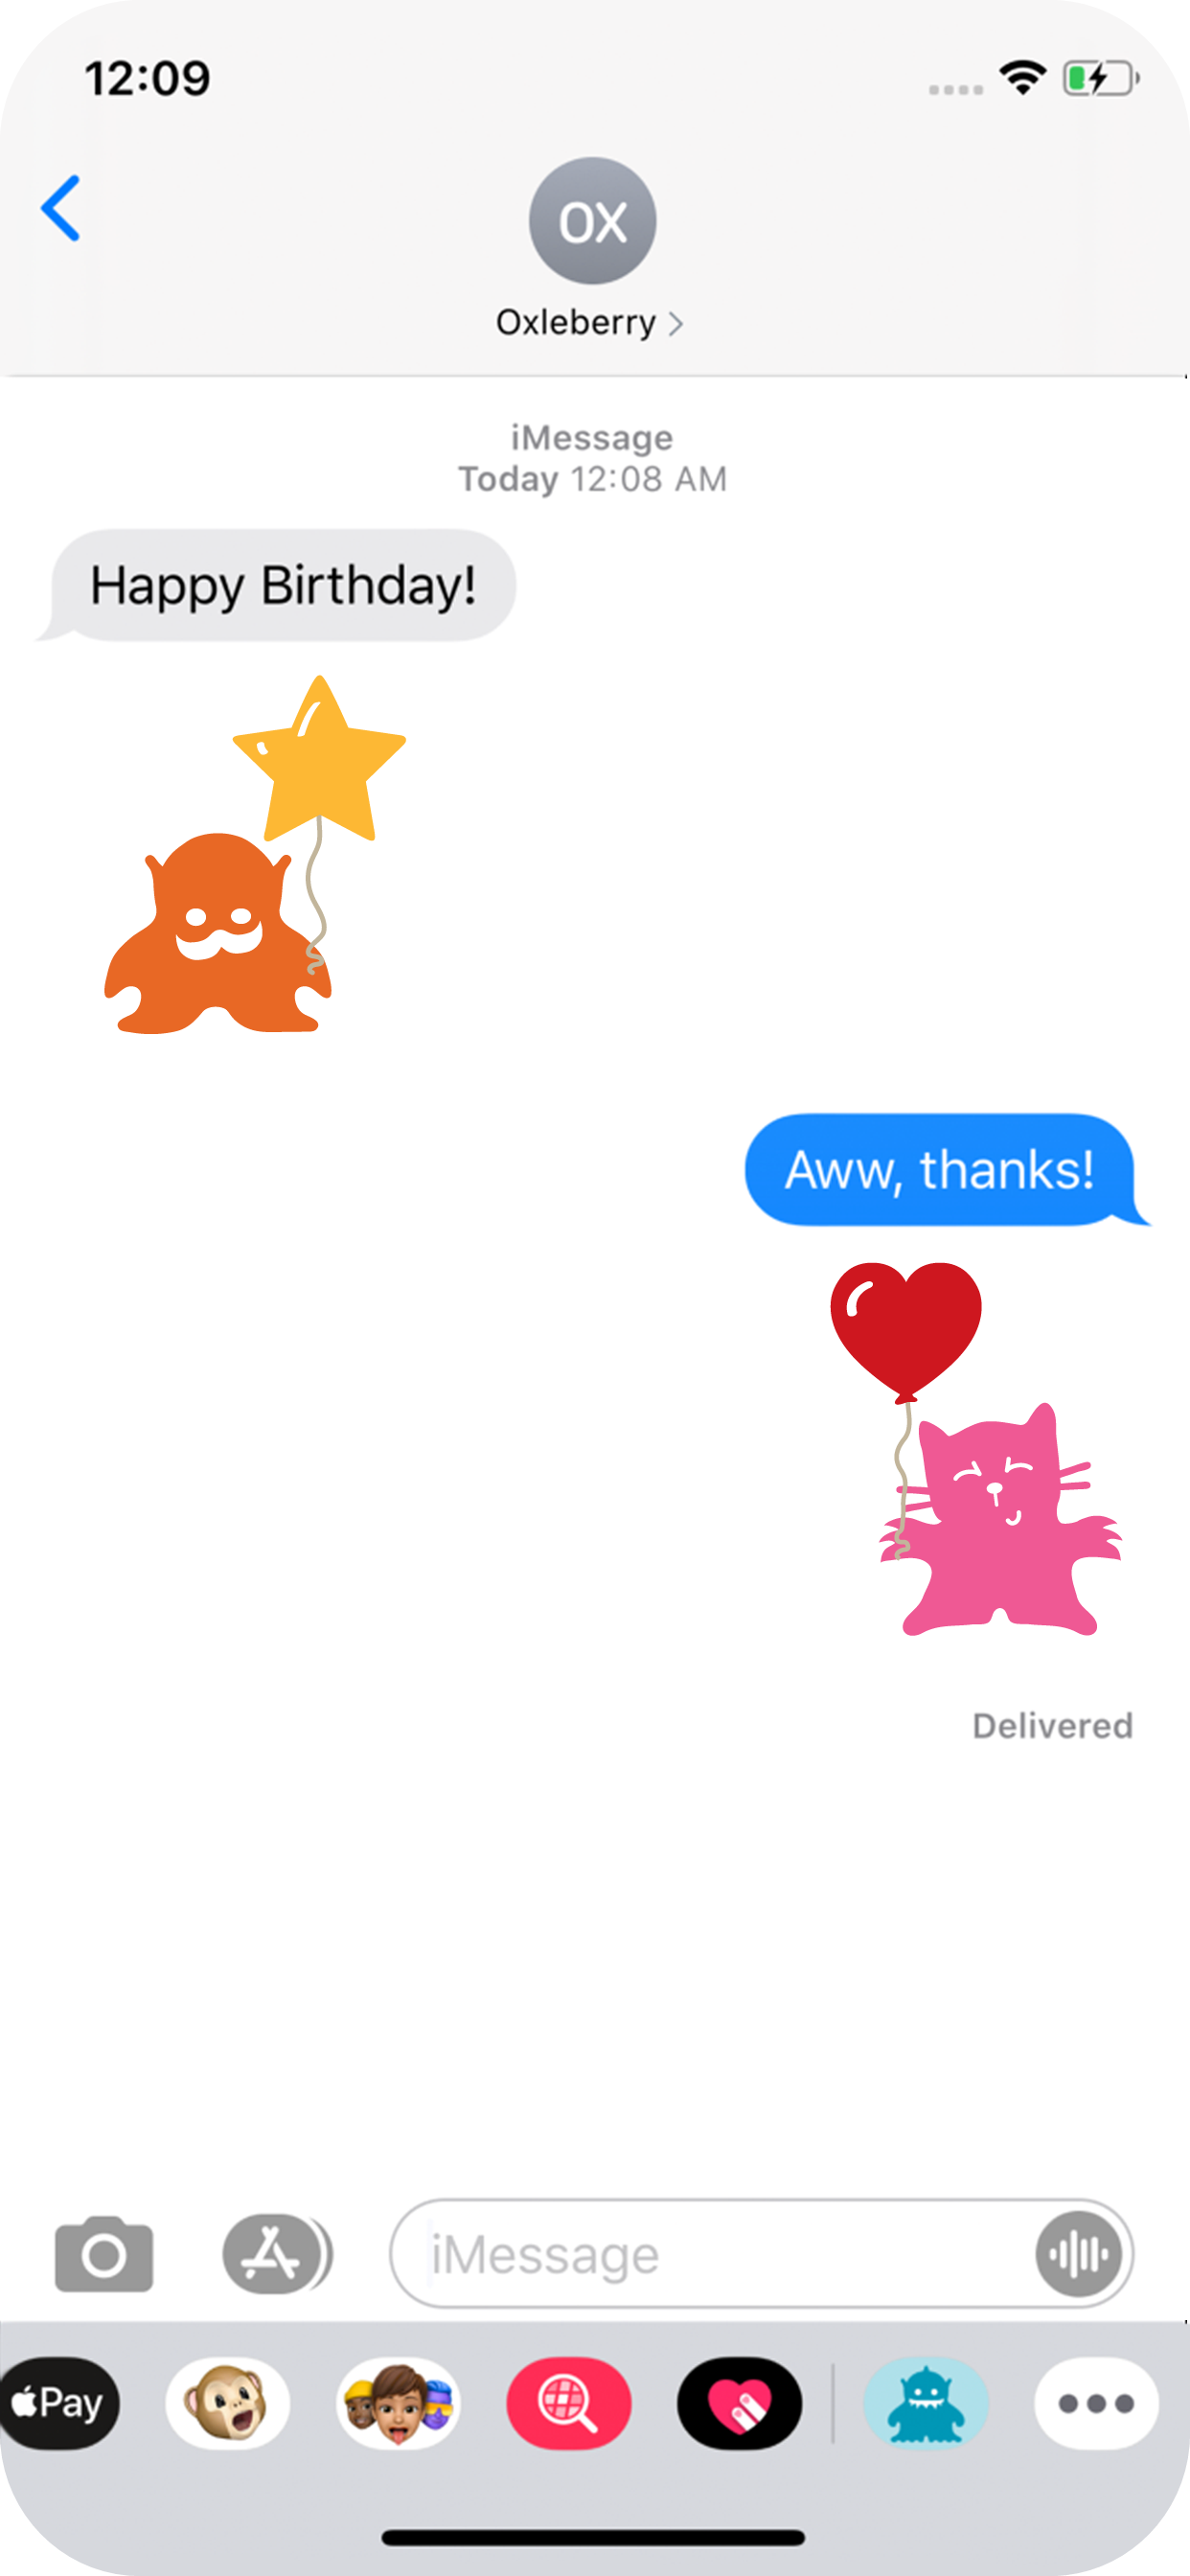 Example of stickers being used in a text message